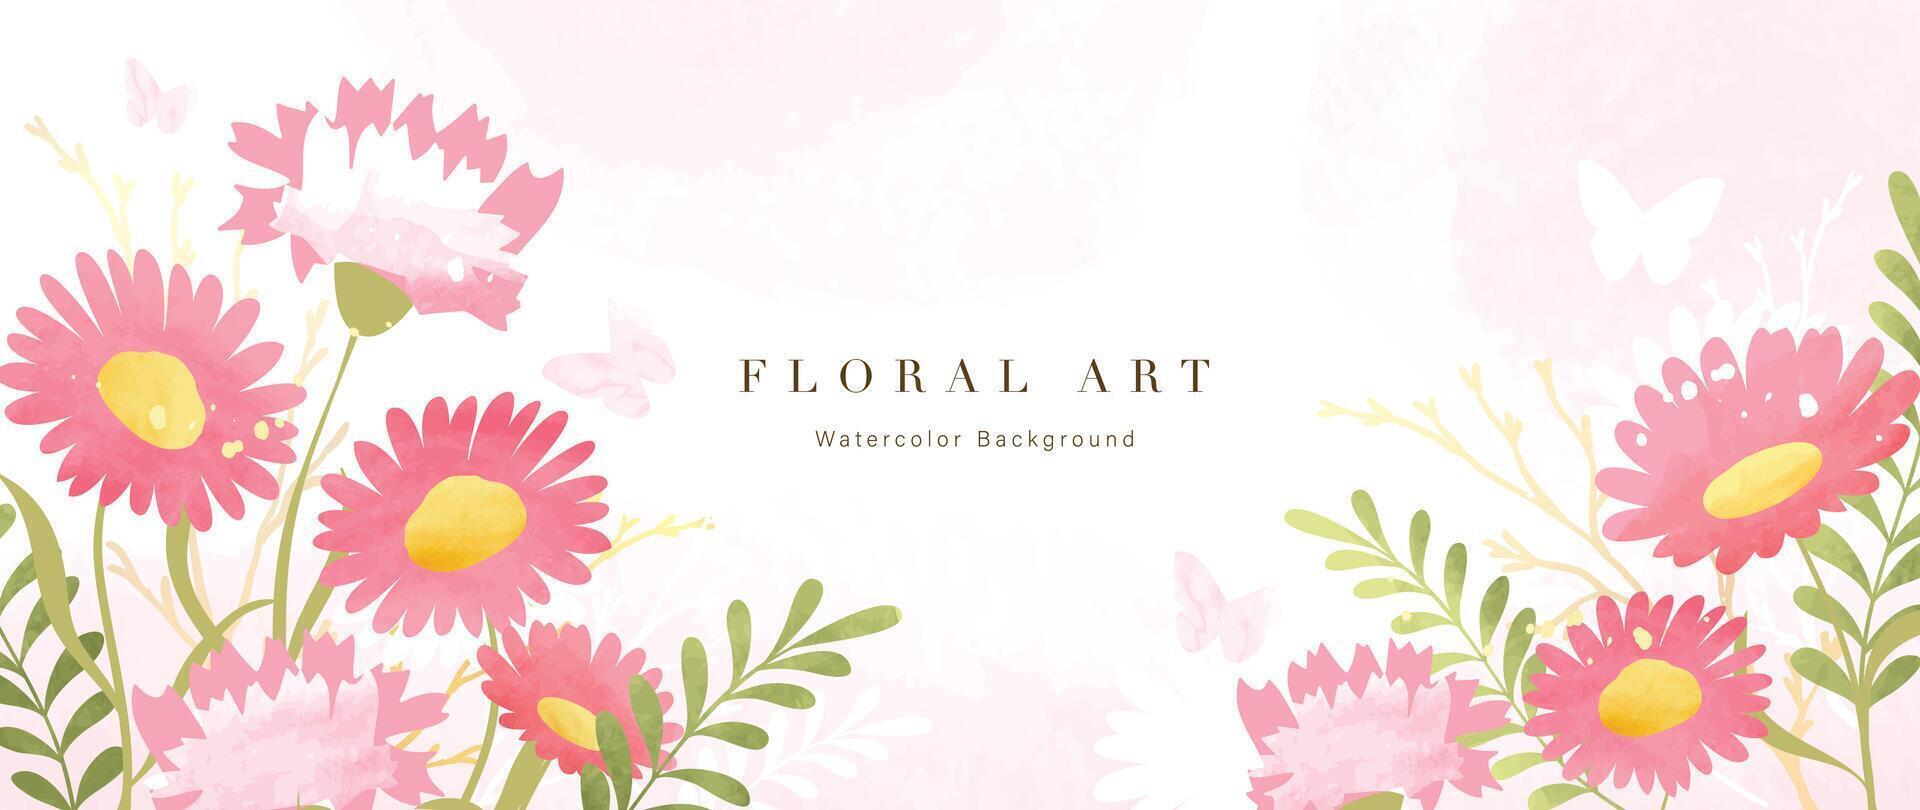 Abstract floral art background . Botanical watercolor hand drawn flowers paint brush line art. Design illustration for wallpaper, banner, print, poster, cover, greeting and invitation card. vector